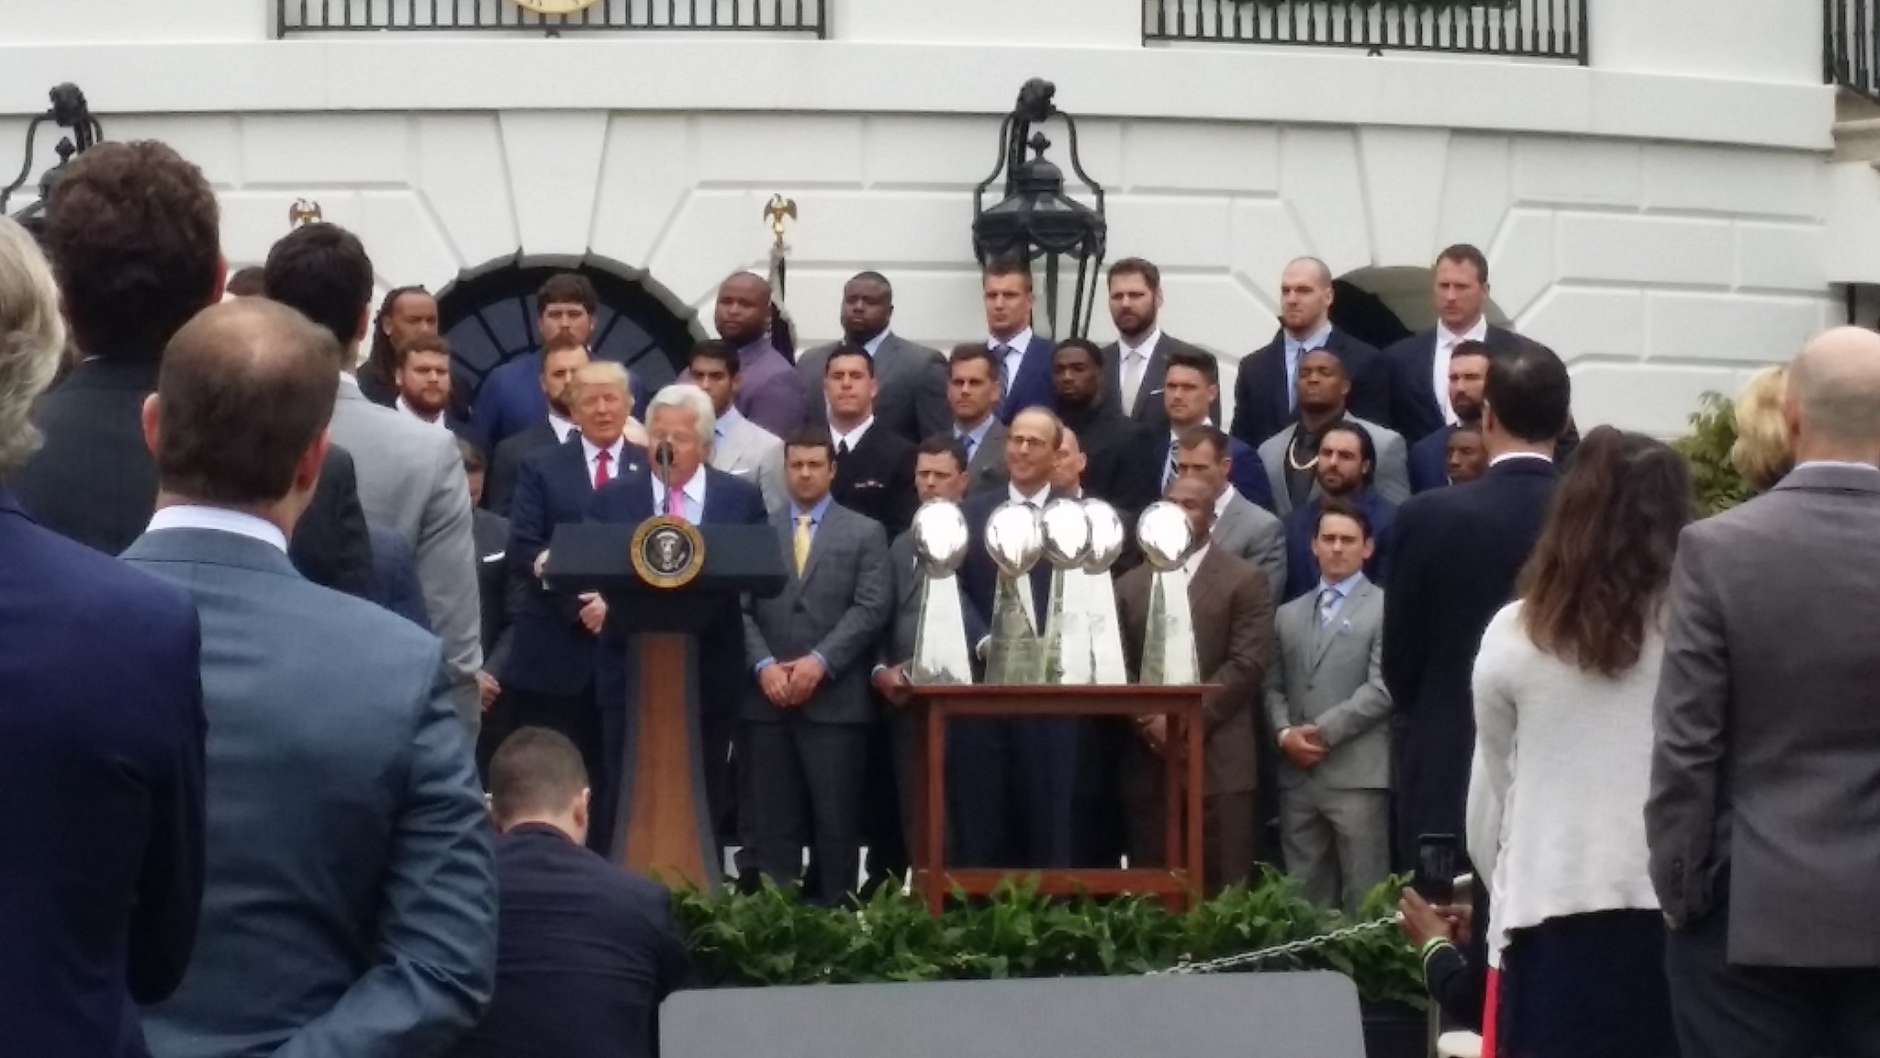 Patriots owner Robert Kraft speaks during a ceremony honoring the Super Bowl champion New England Patriots on the South Lawn. (WTOP/J. Brooks)